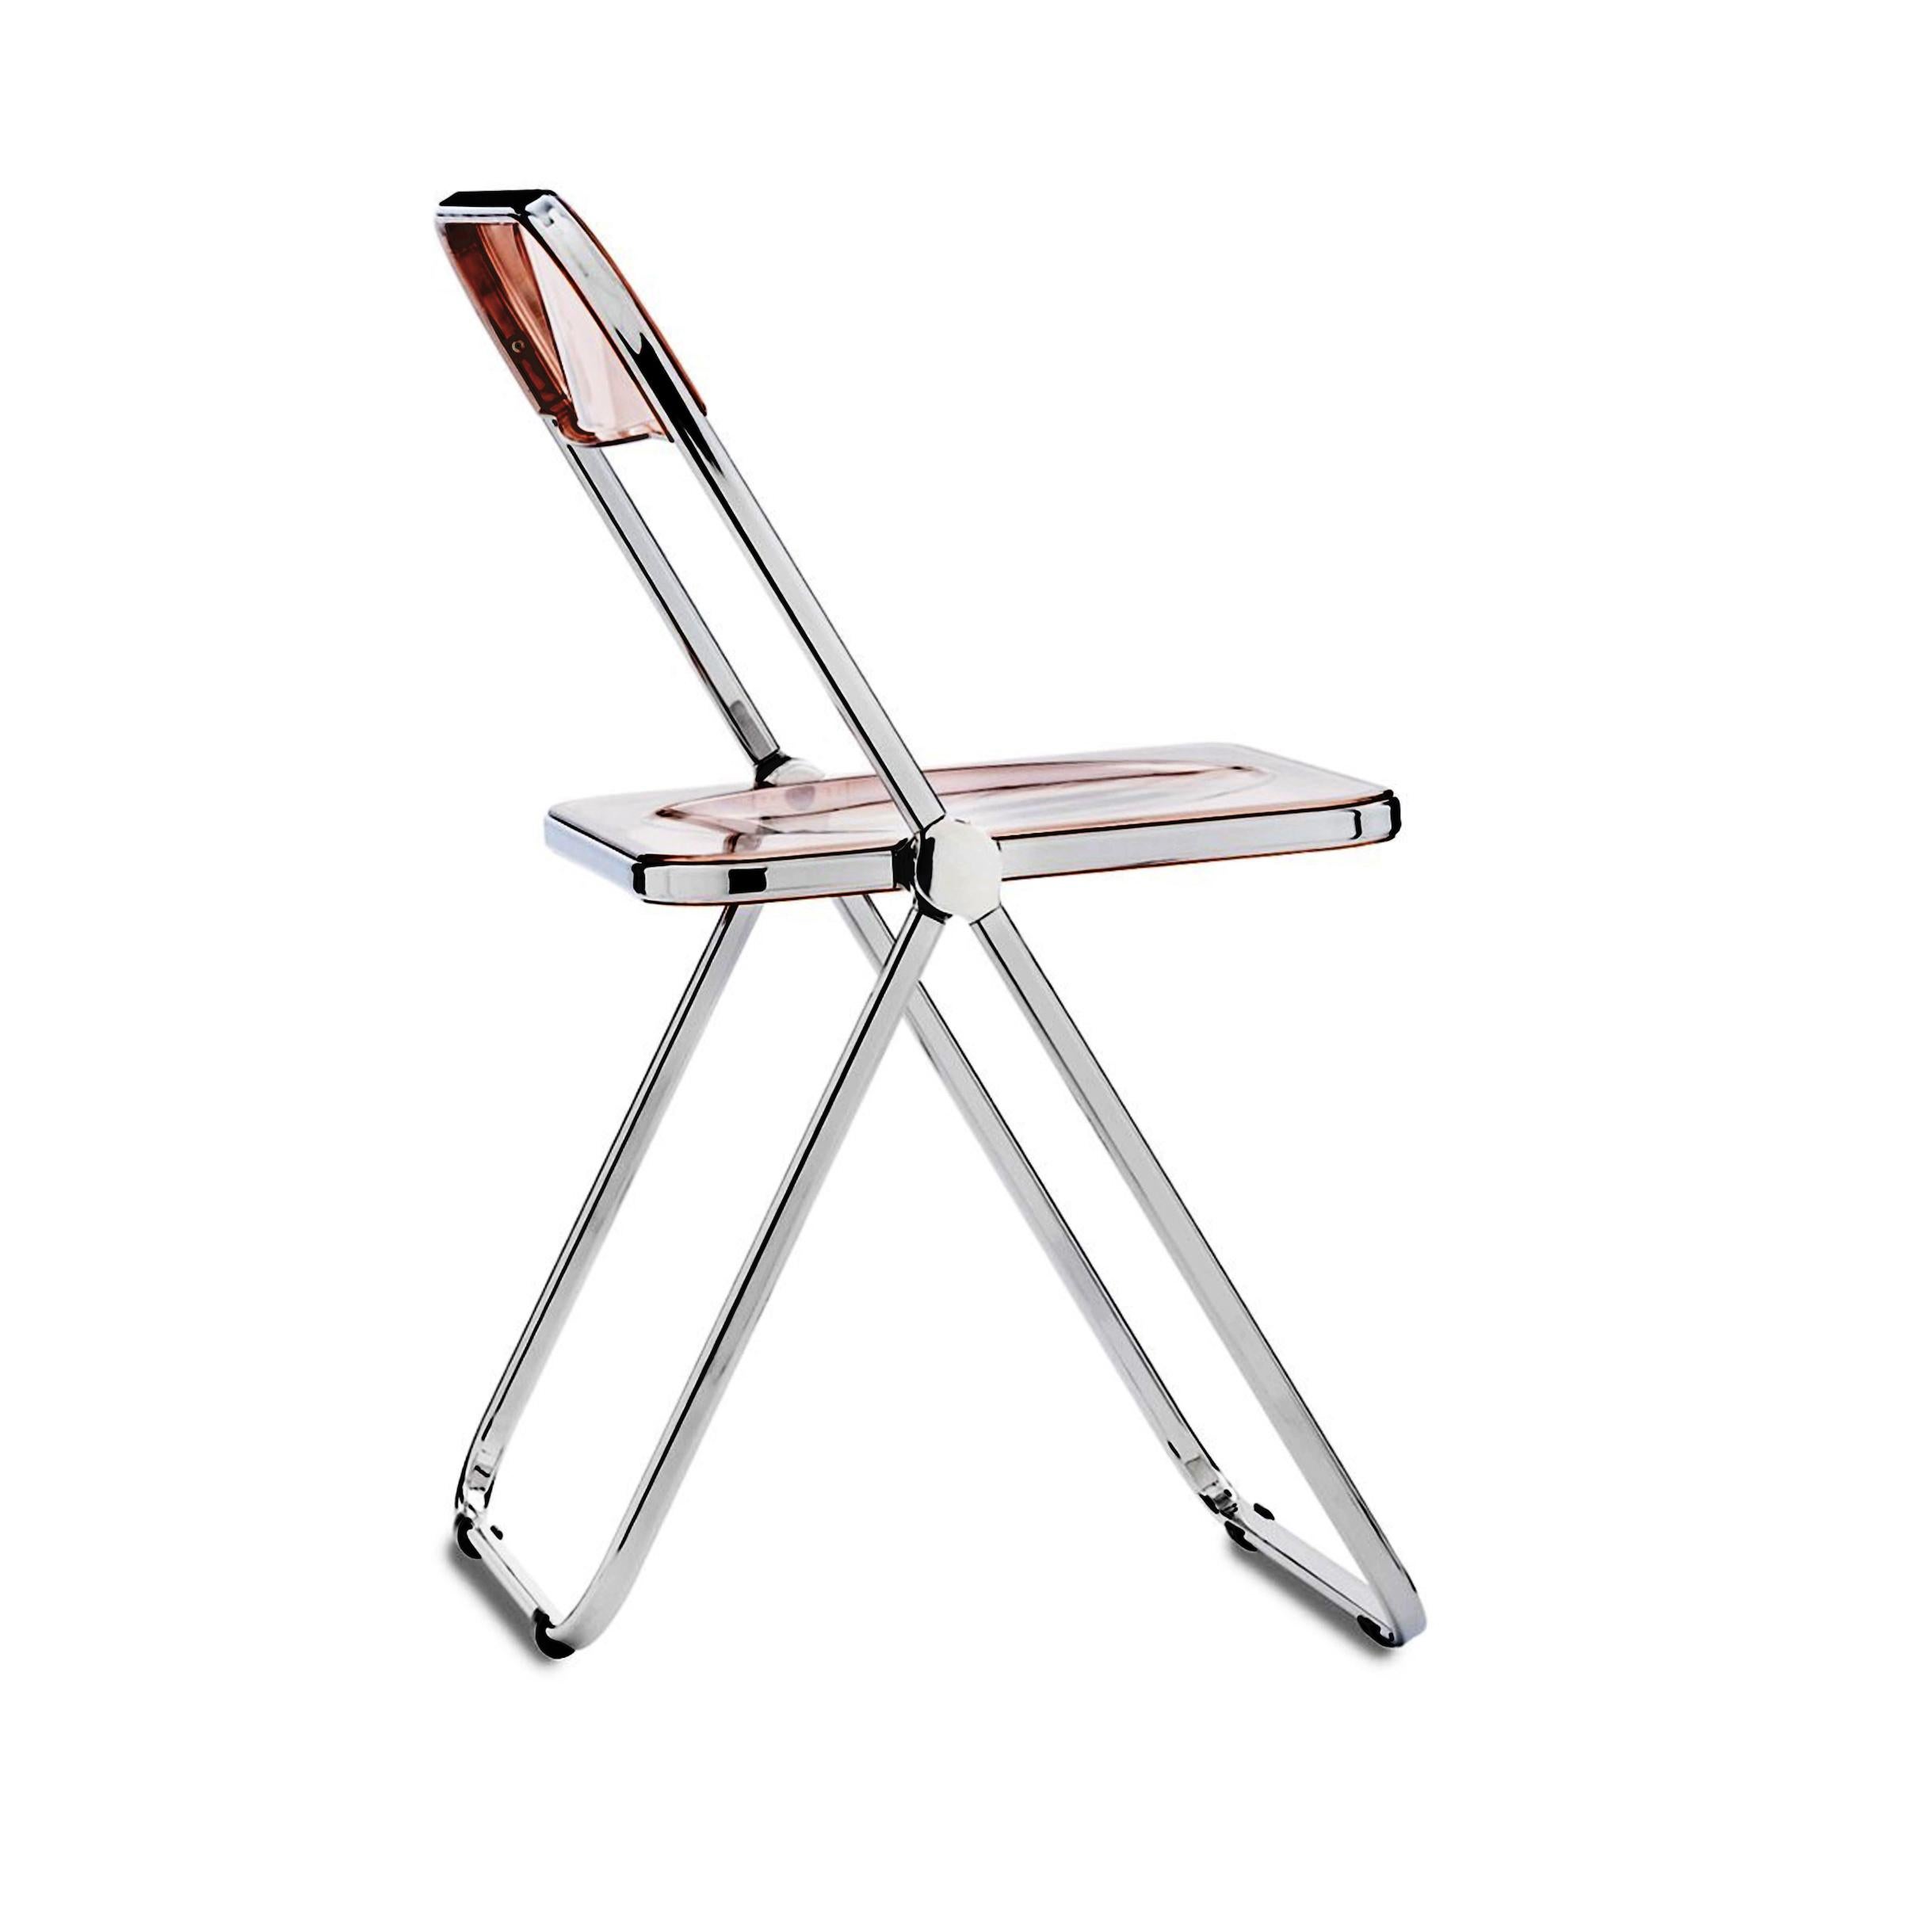 Set of 6 Lucite Pink and Chrome Plia Chairs, Piretti for Castelli, Italy 1970s For Sale 2